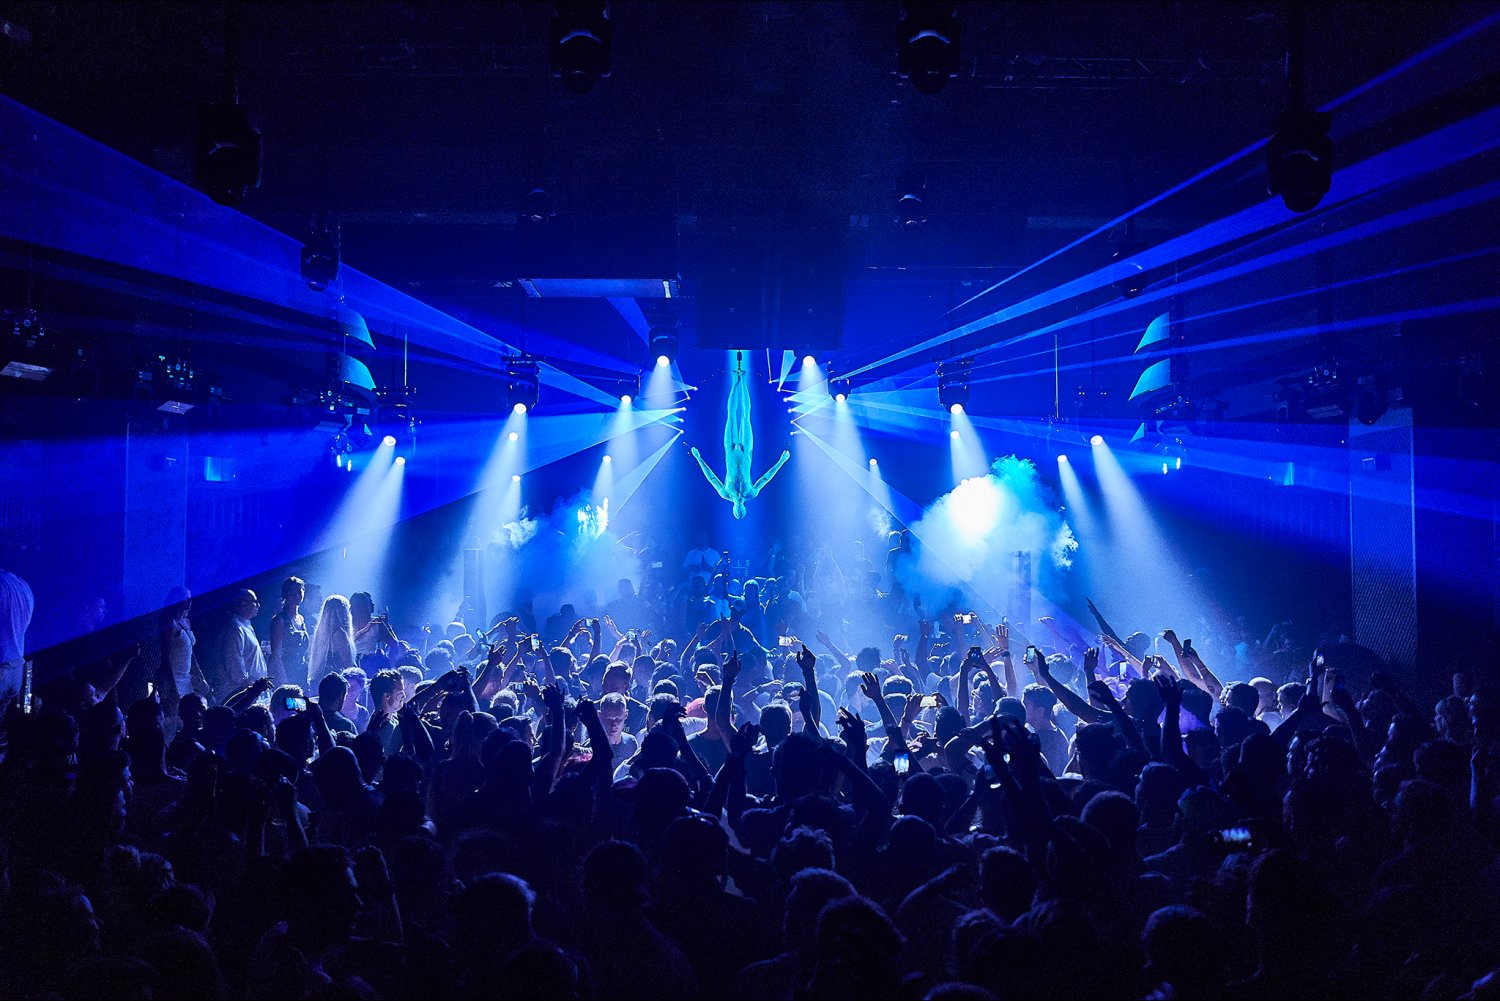 Afterlife announces line-up for opening party at Hï Ibiza